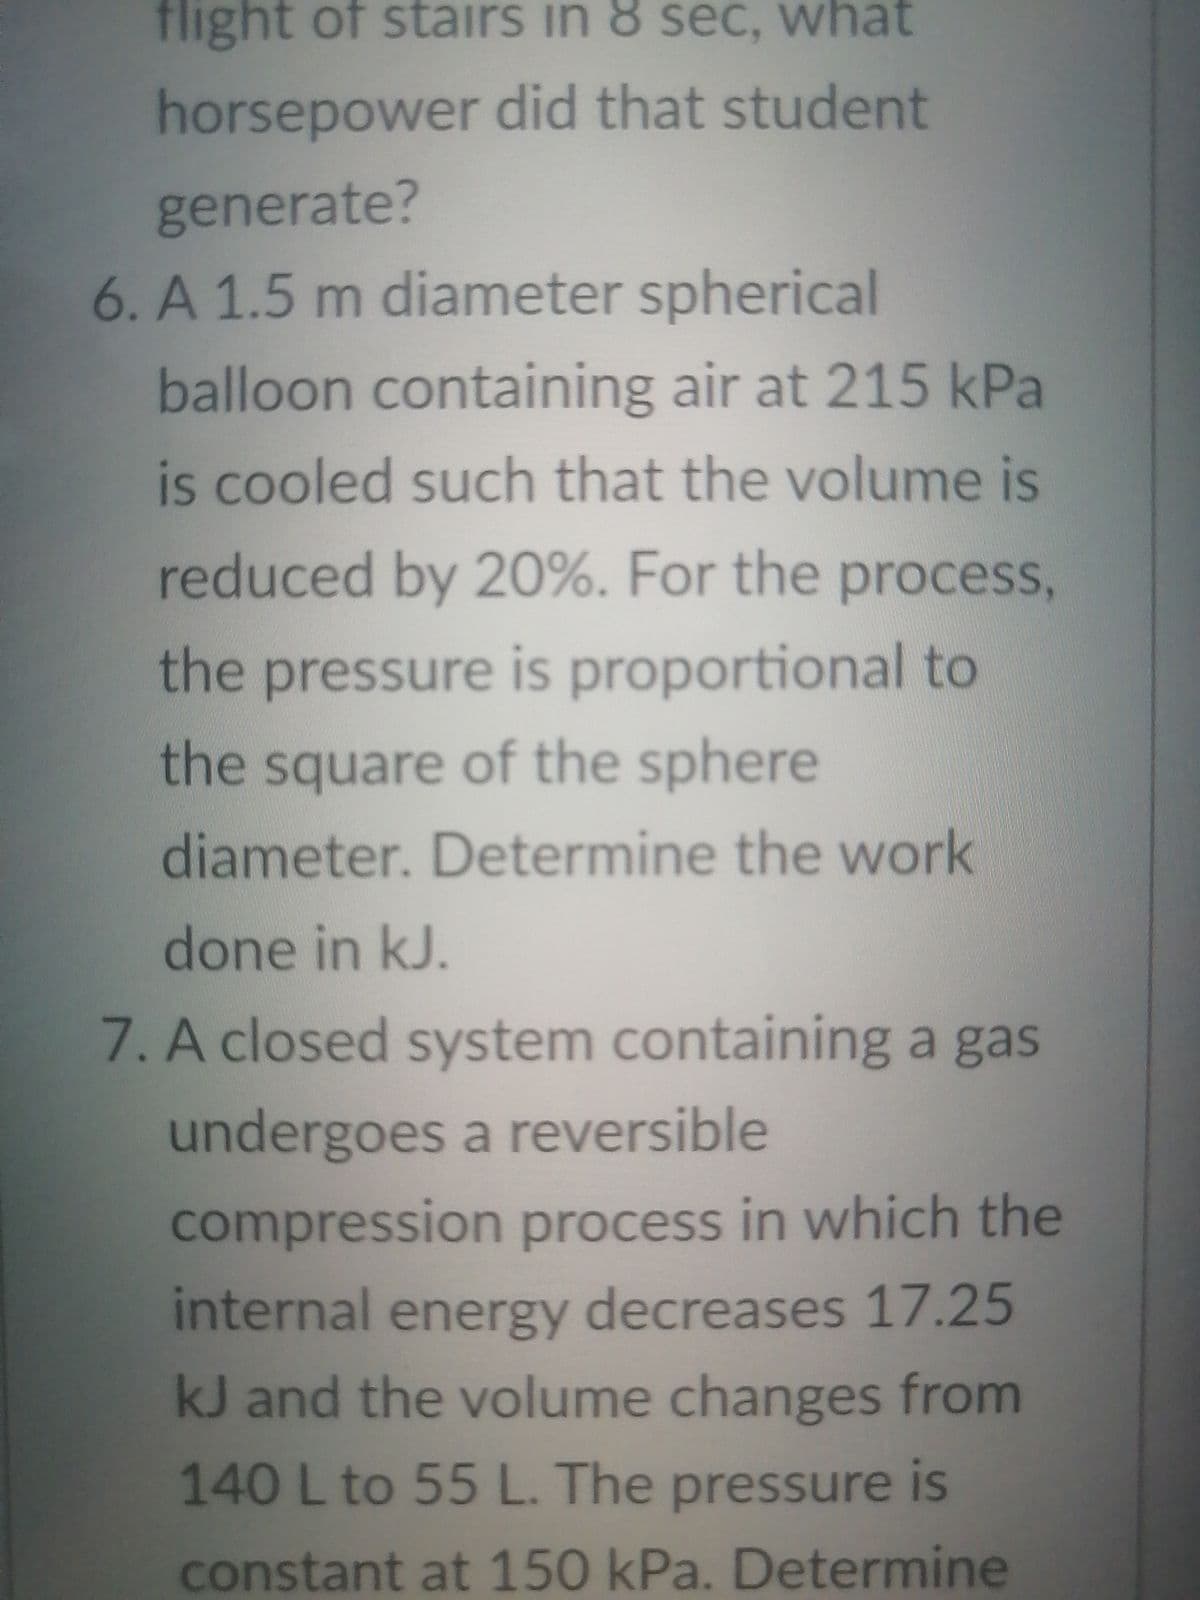 flight of stairs in 8 sec, what
horsepower did that student
generate?
6. A 1.5 m diameter spherical
balloon containing air at 215 kPa
is cooled such that the volume is
reduced by 20%. For the process,
the pressure is proportional to
the square of the sphere
diameter. Determine the work
done in kJ.
7. A closed system containing a gas
undergoes a reversible
compression process in which the
internal energy decreases 17.25
kJ and the volume changes from
140 L to 55 L. The pressure is
constant at 150 kPa. Determine